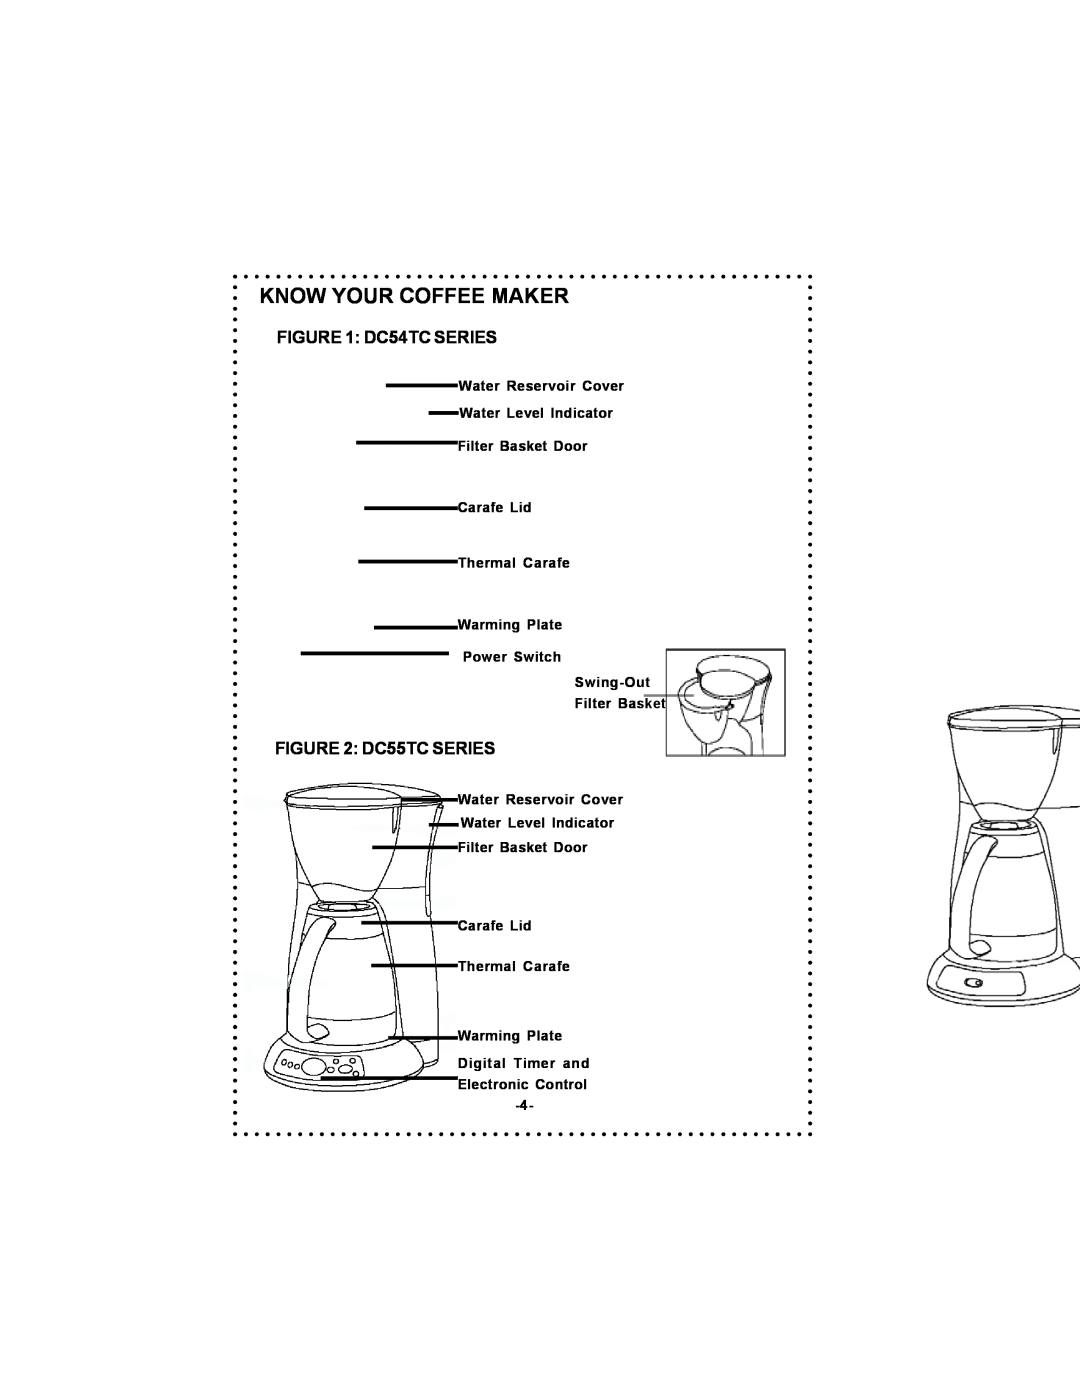 DeLonghi instruction manual Know Your Coffee Maker, DC54TC SERIES, DC55TC SERIES, Filter Basket, Electronic Control 